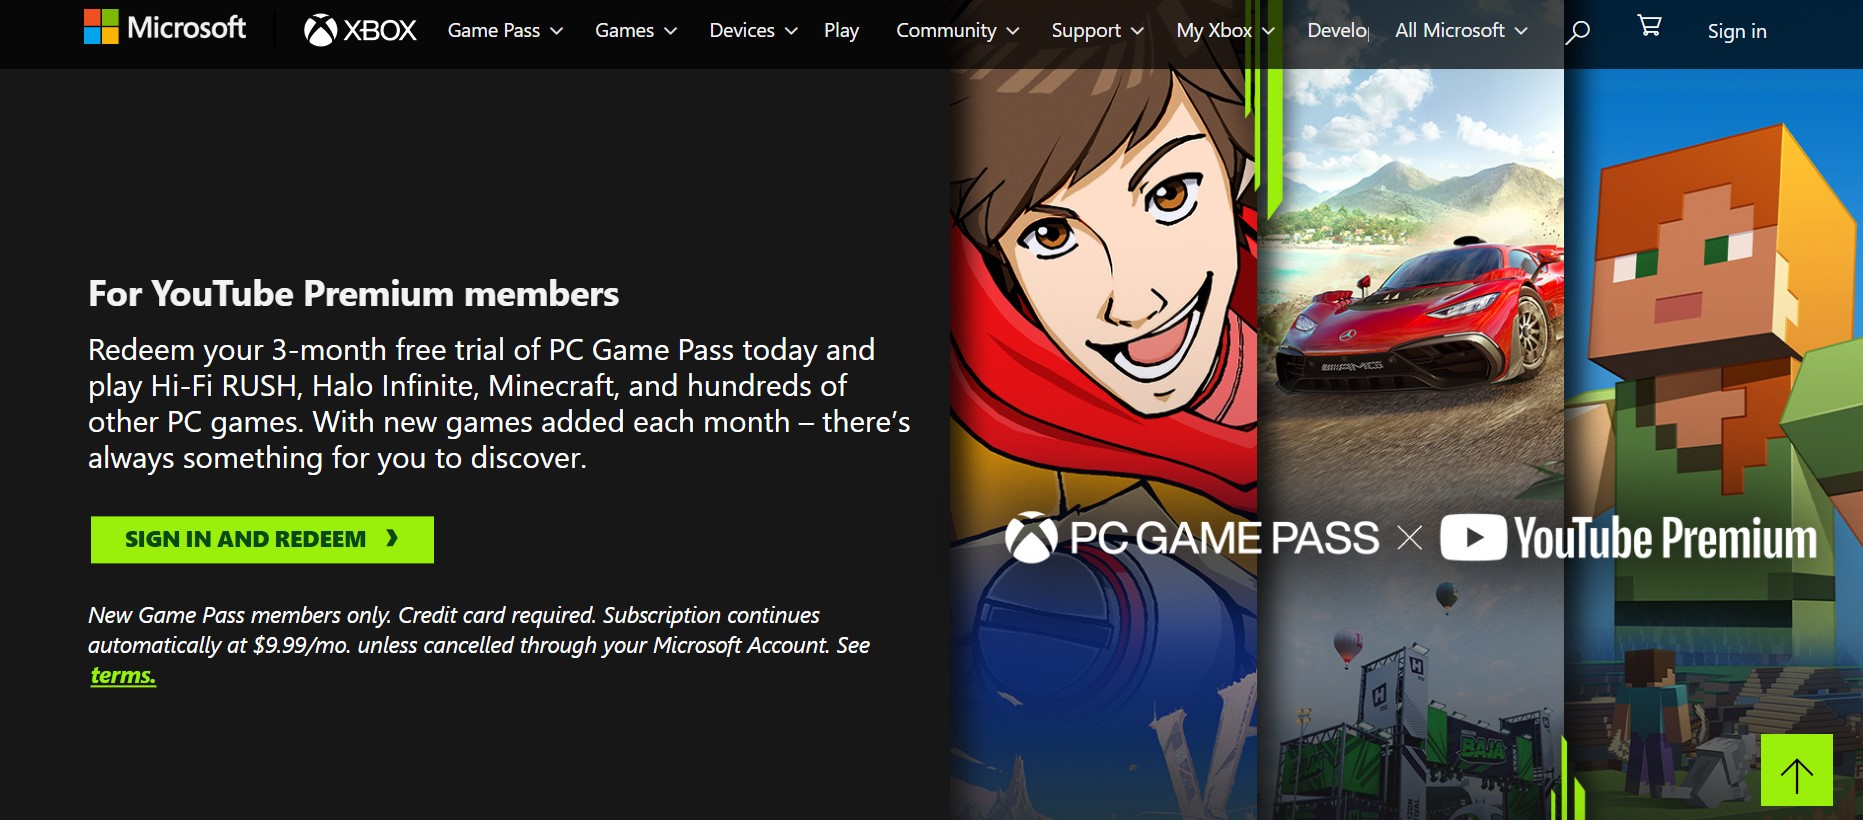 PC Game Pass offer Xbox website